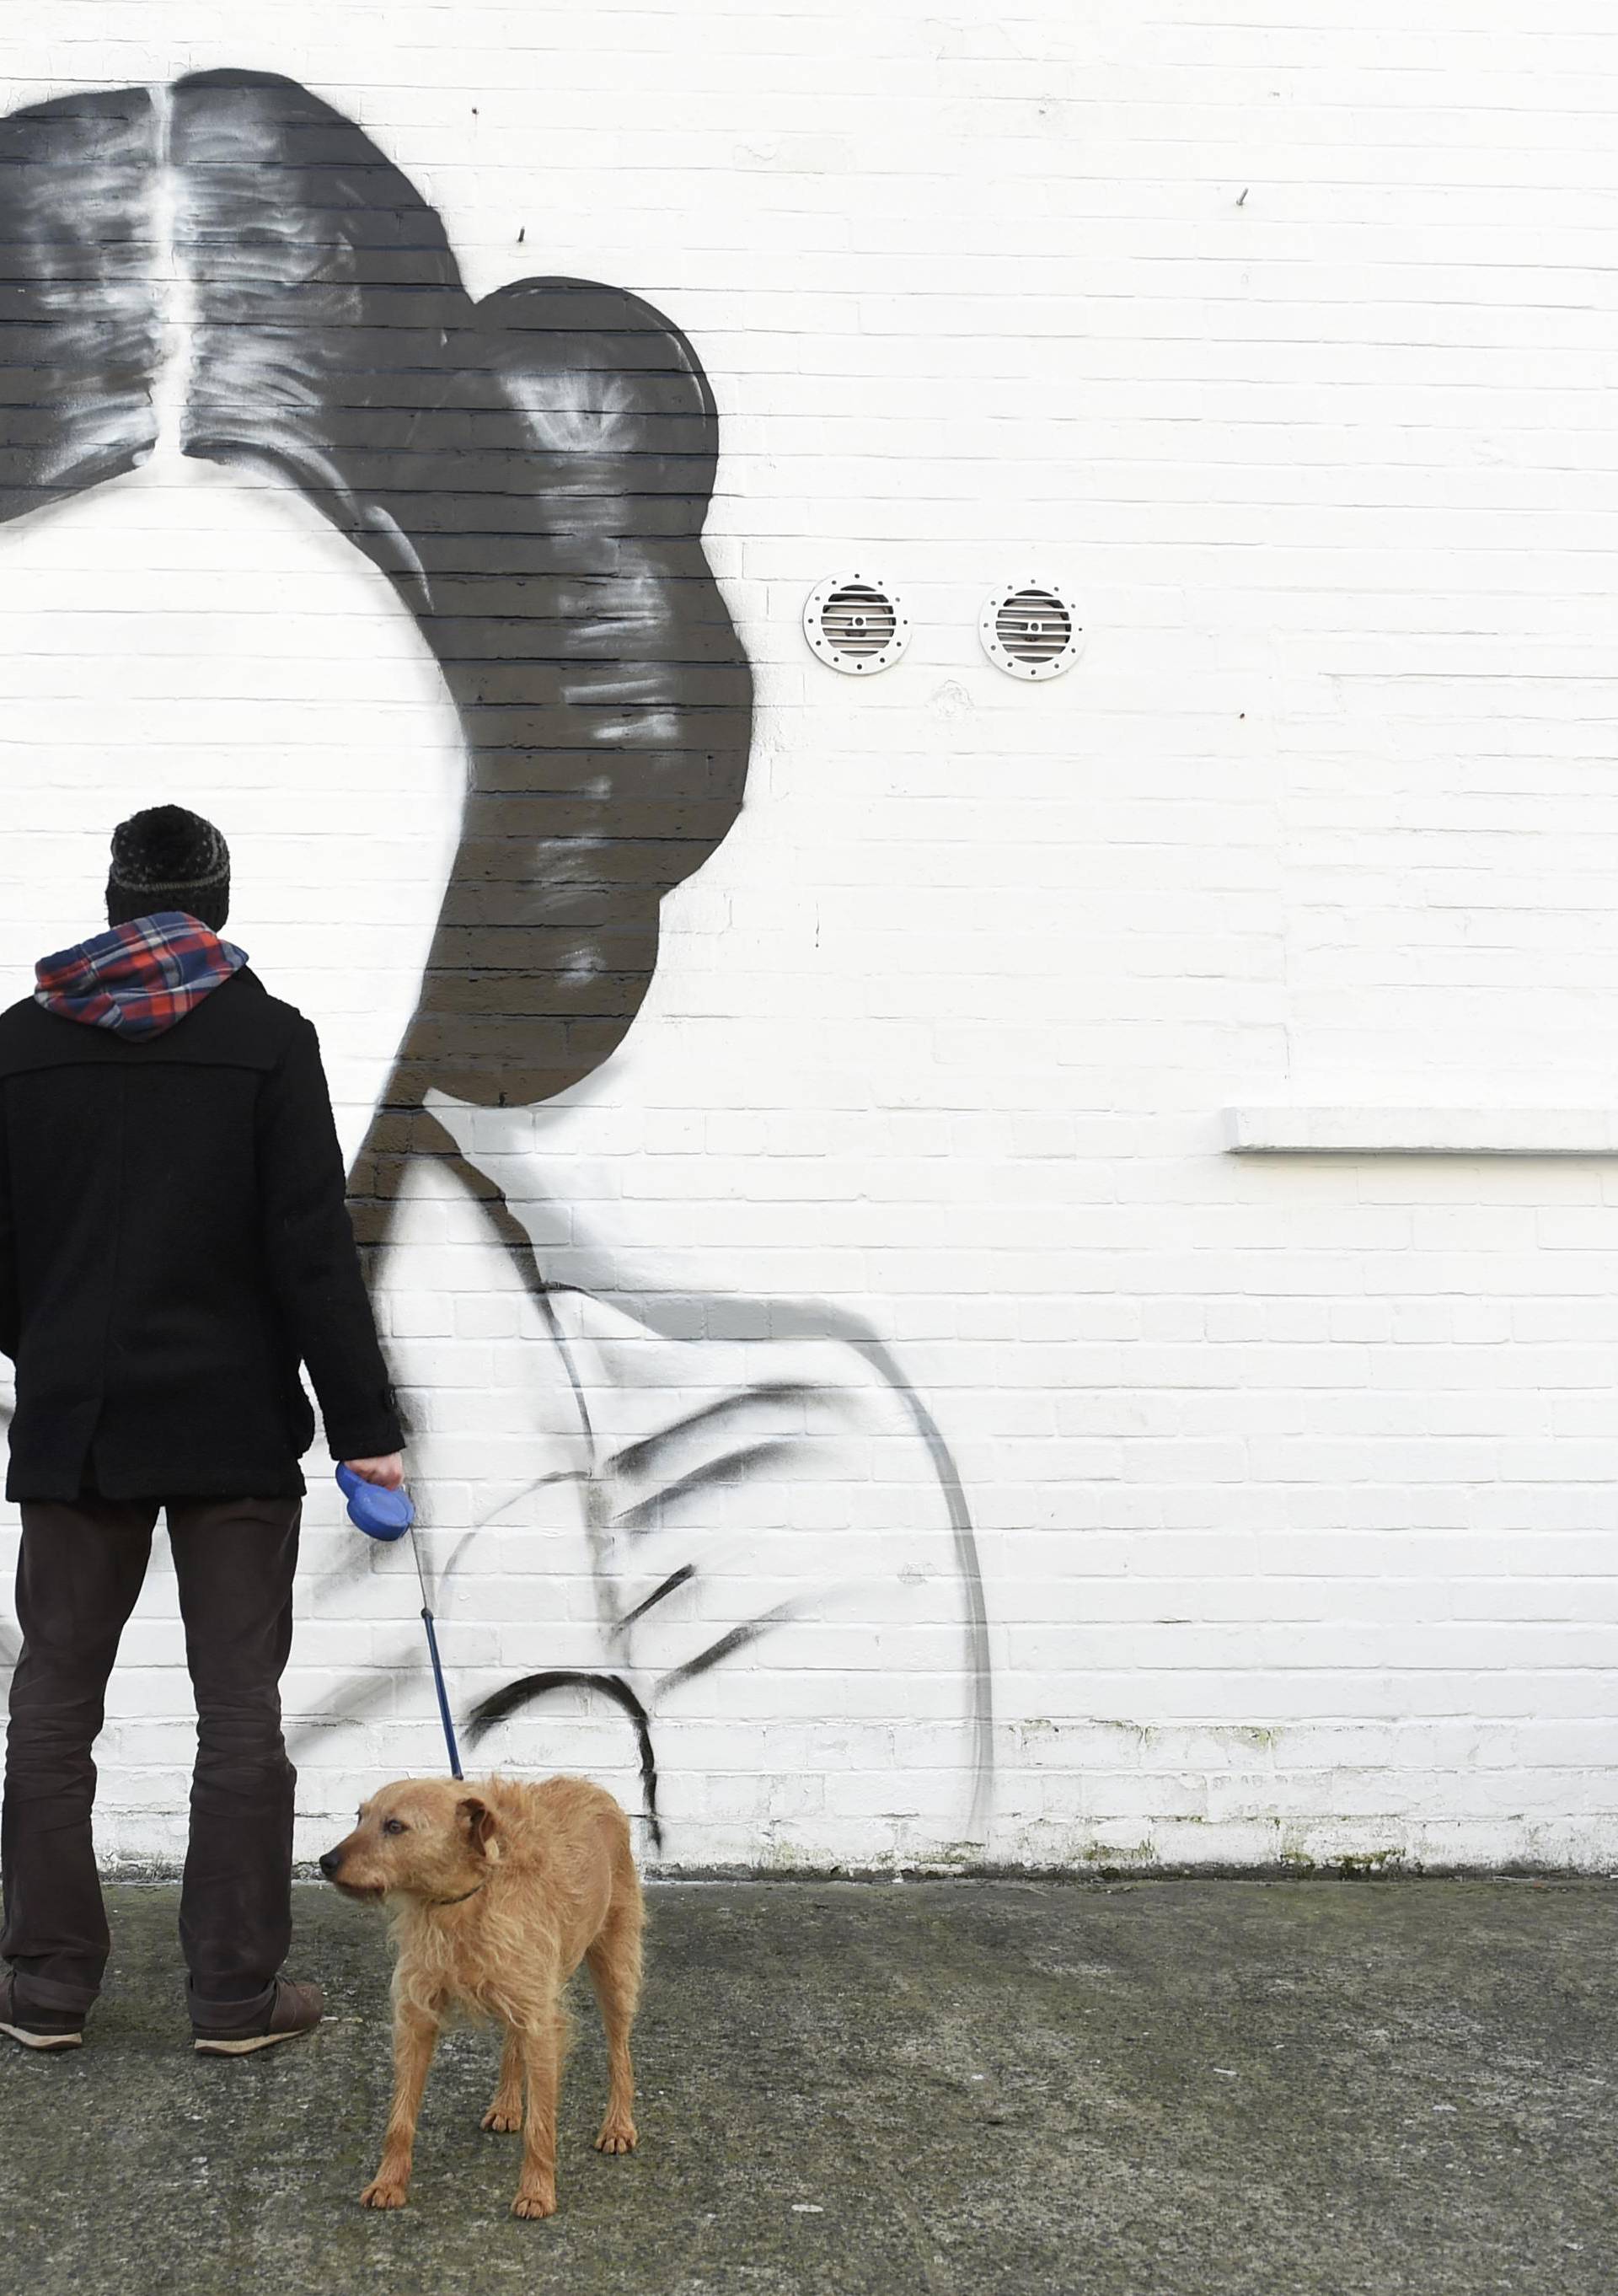 A man and his dog stop to look at a mural depicting Princess Leia from the film Star Wars played by Carrie Fisher in Belfast